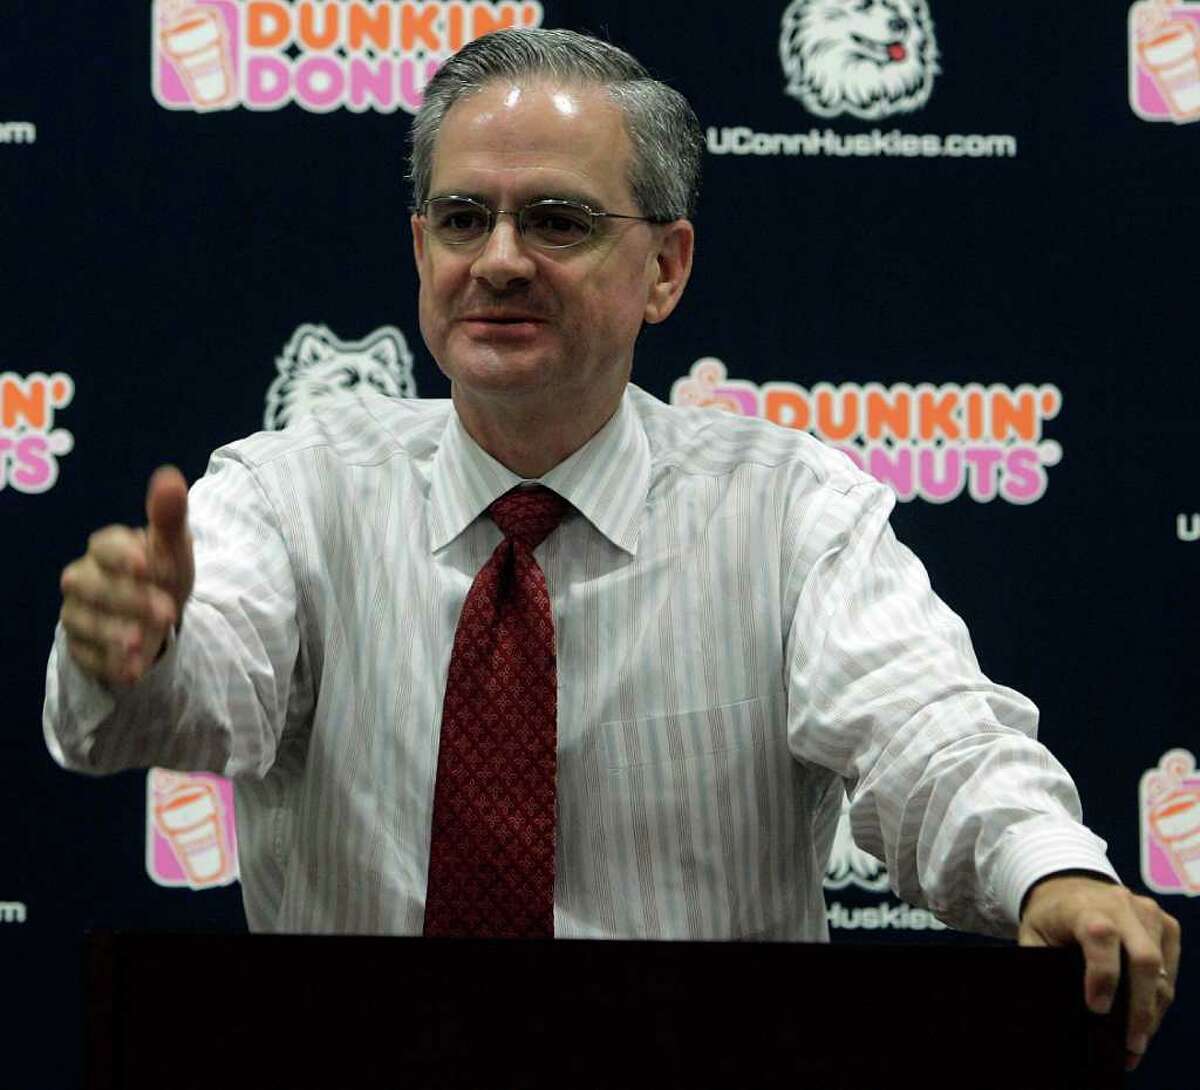 University of Connecticut Director of Athletics Jeff Hathaway answers a question during a news conference on the UConn campus at Storrs, Conn., Tuesday, Sept. 11, 2007. (AP Photo/Bob Child)